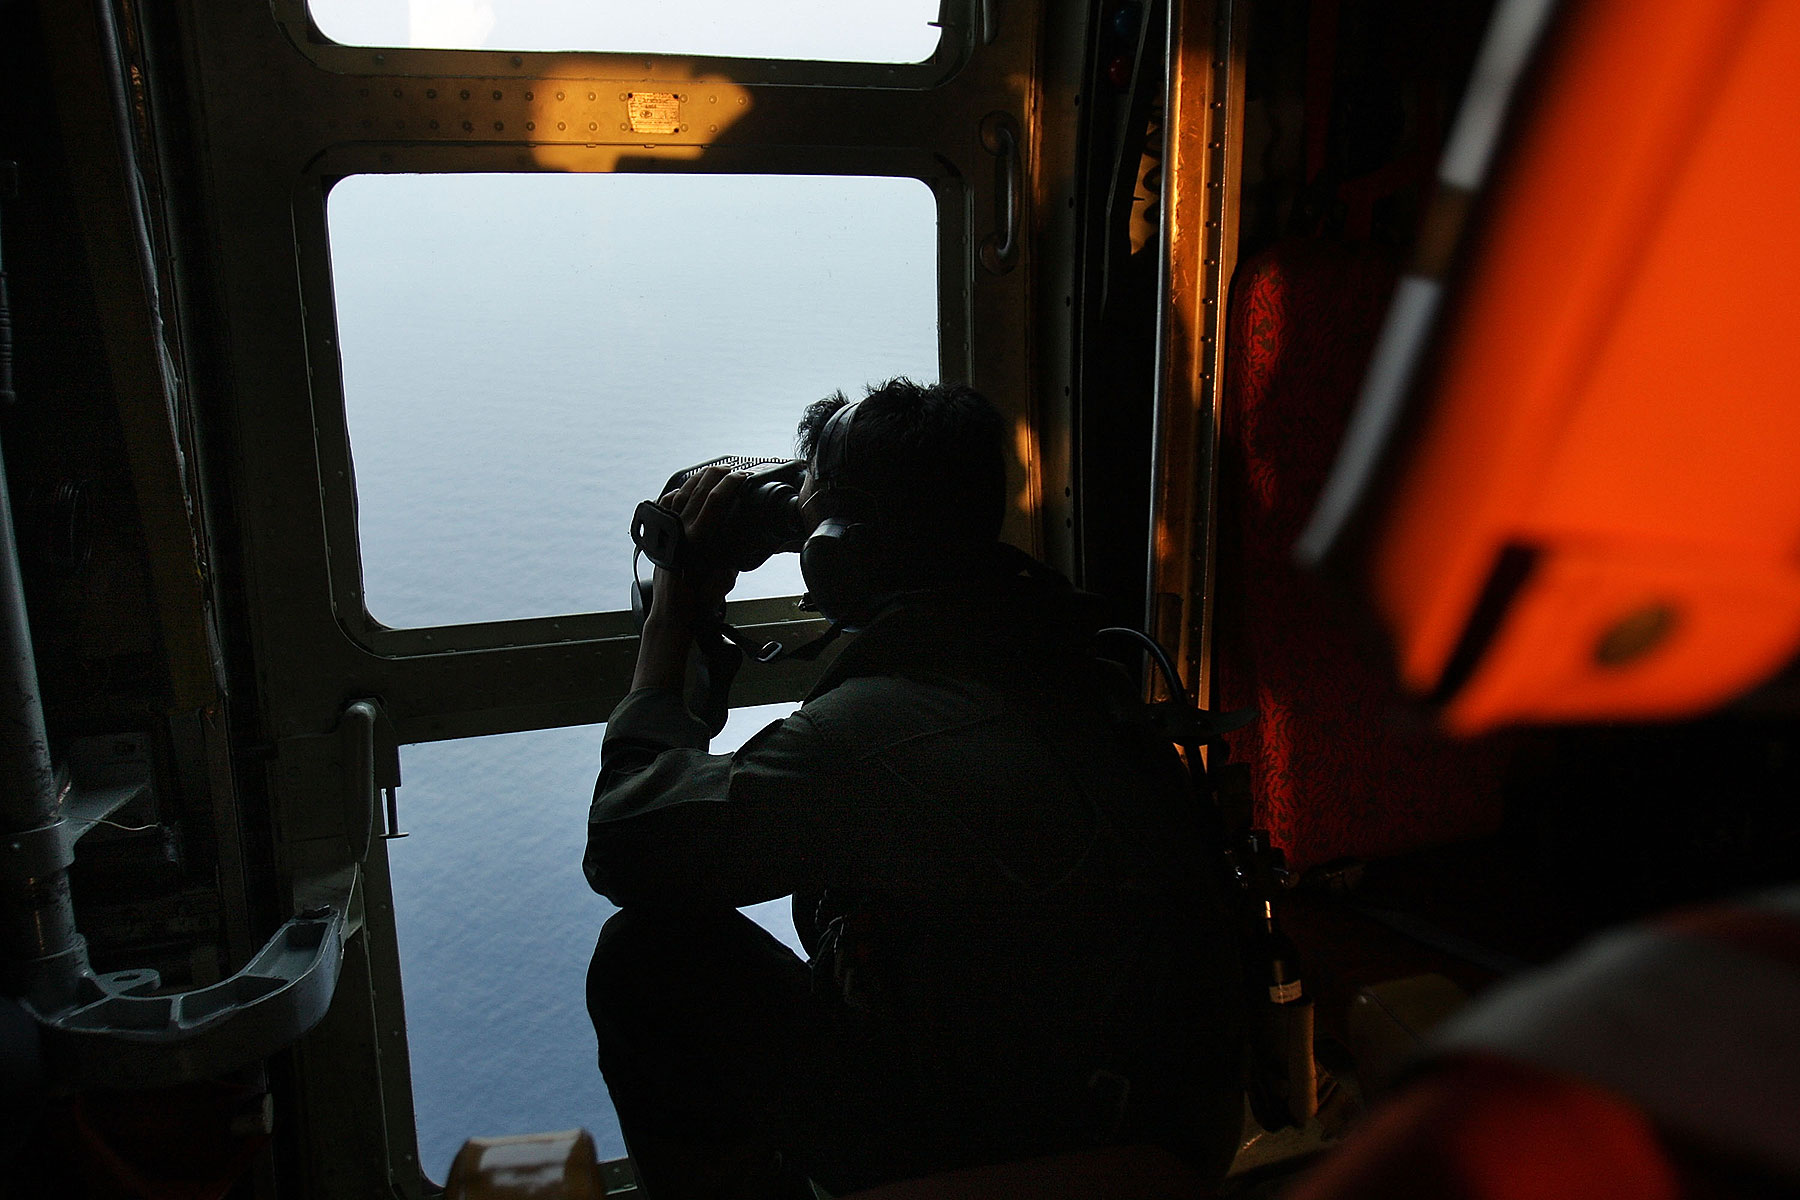 Malaysian Air Forces search the water for signs of debris from the Malaysian airliner during a search and rescue mission flight on March 13, 2014 in Kuala Lumpur, Malaysia (Rahman Roslan—Getty Images)